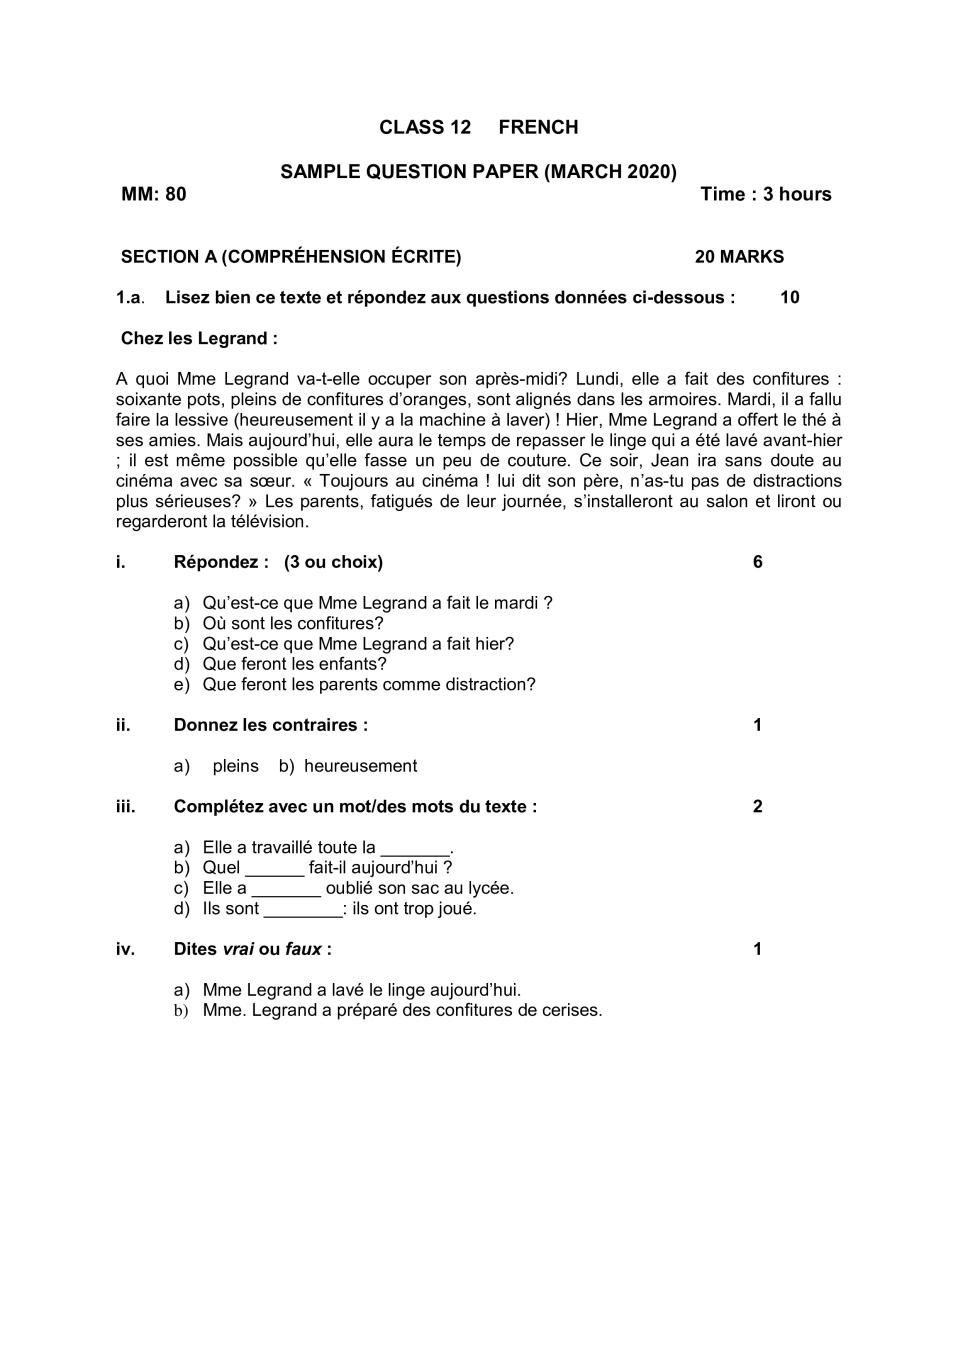 CBSE Class 12 Sample Paper 2020 for French - Page 1